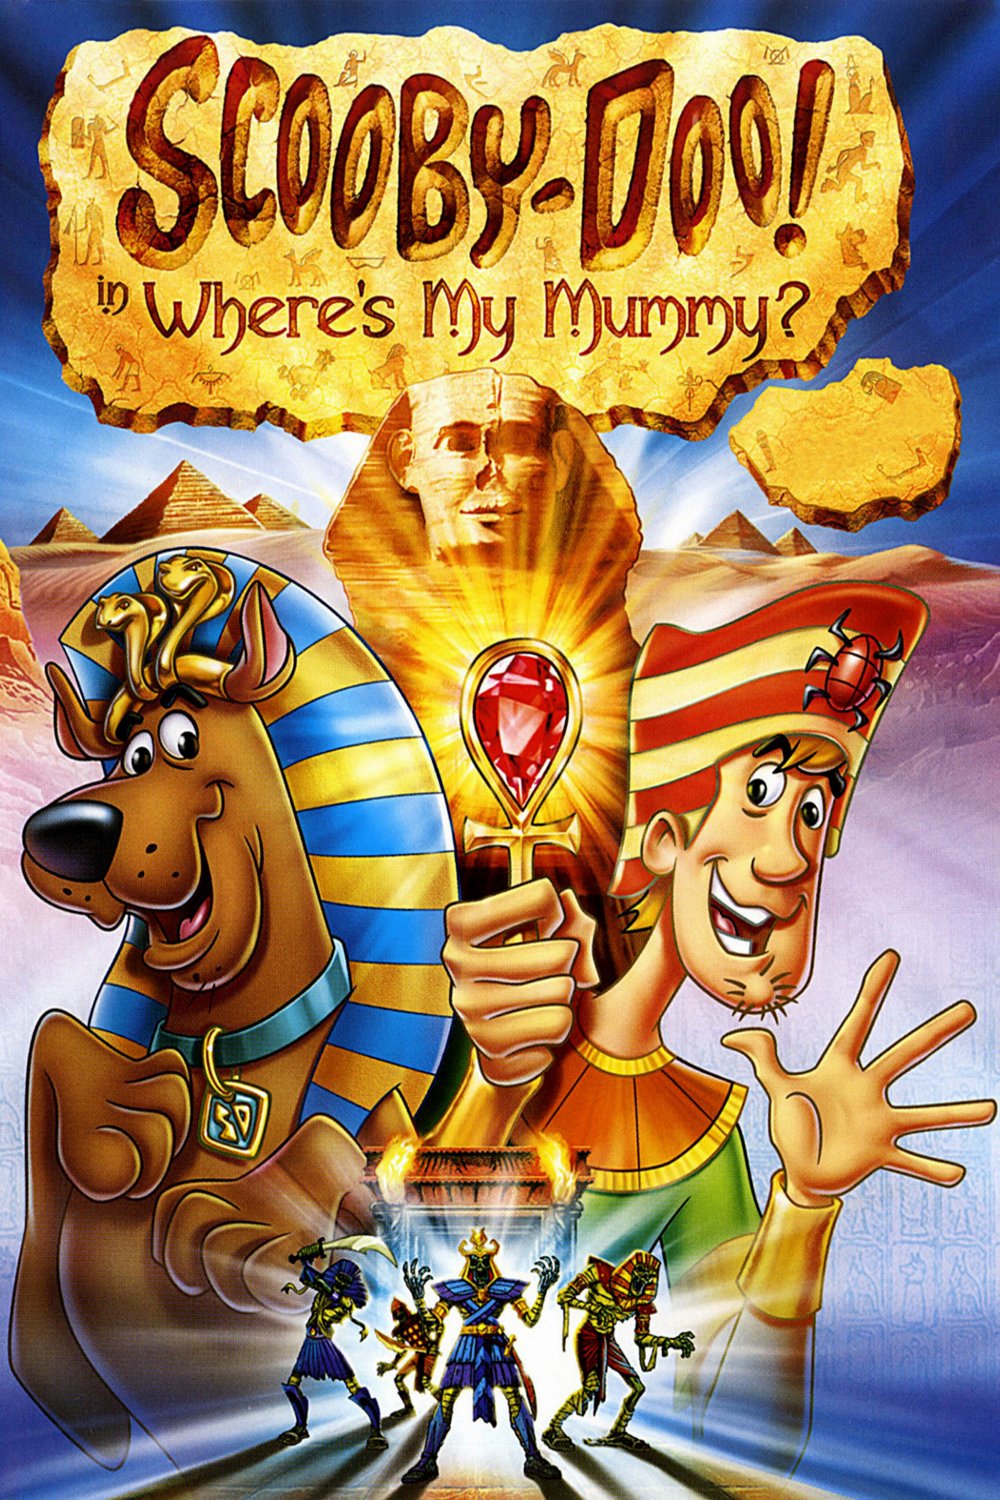 Poster of the movie Scooby-Doo in Where's My Mummy?